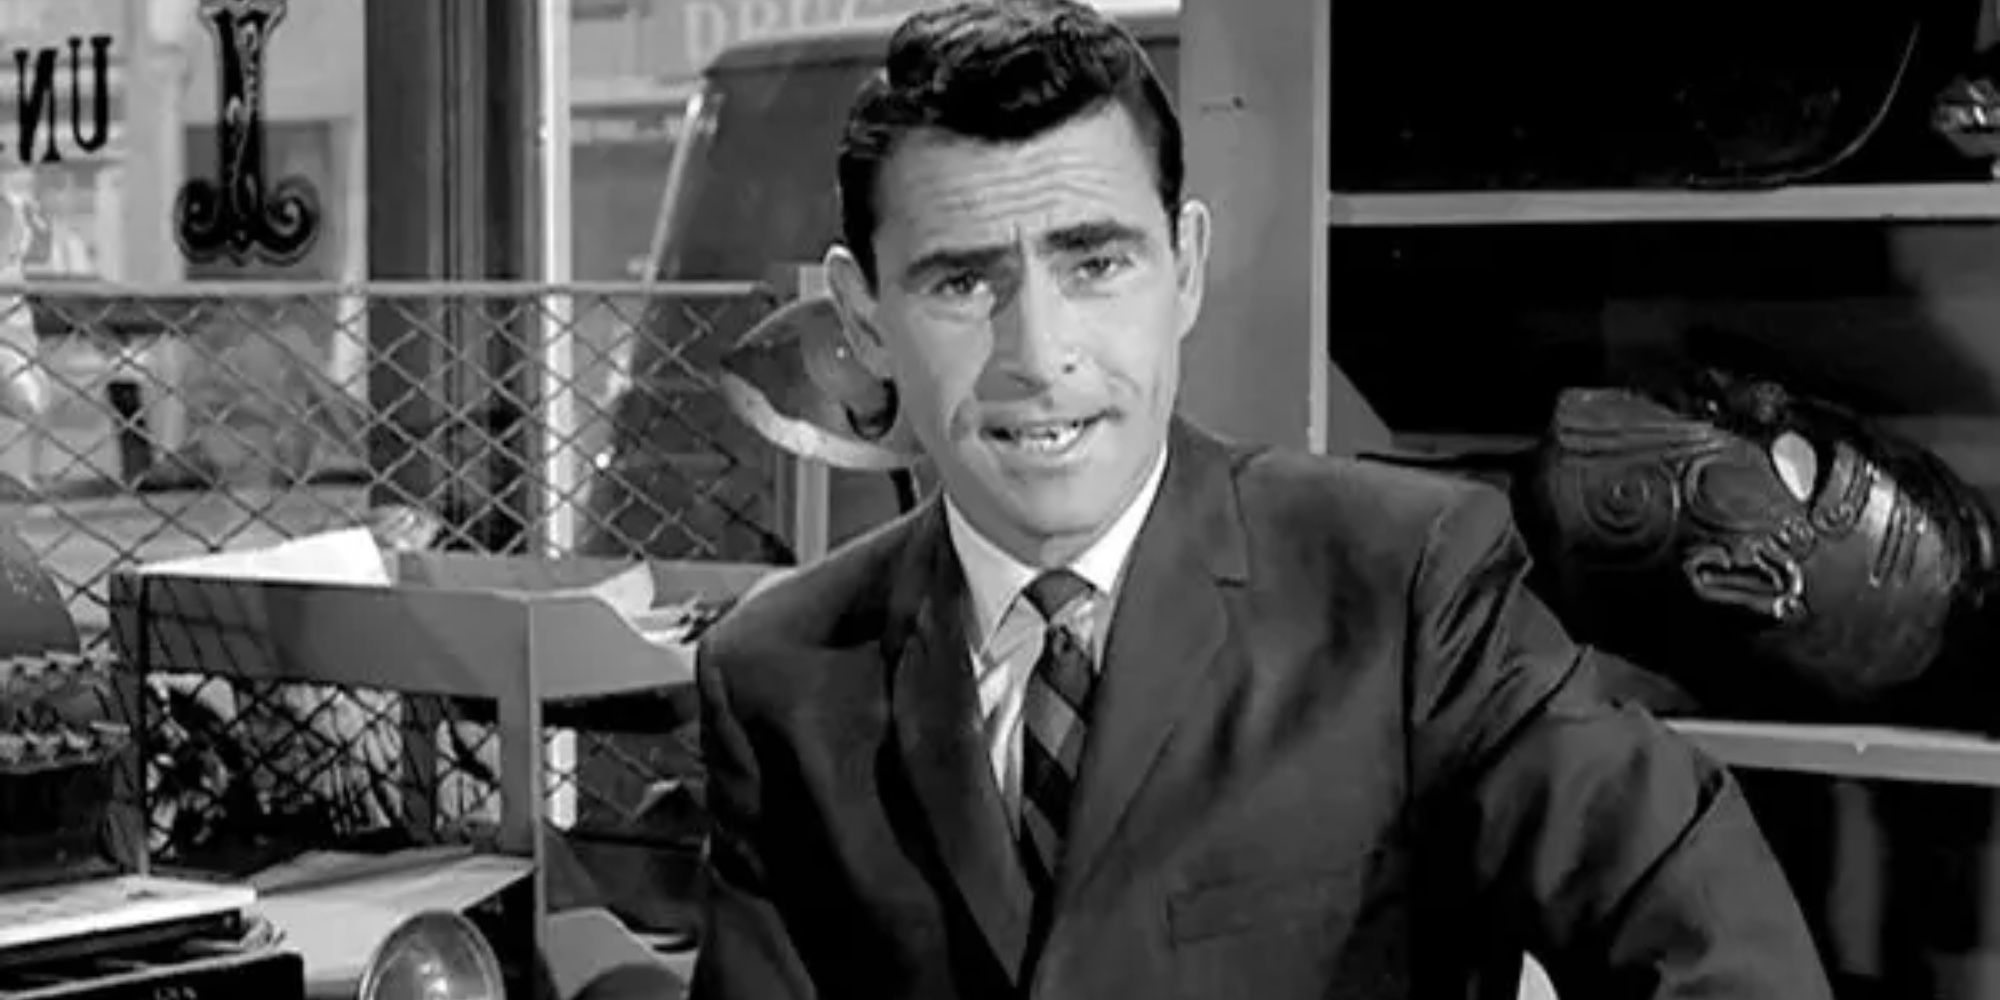 Rod Serling as himself narrating an episode of The Twilight Zone.